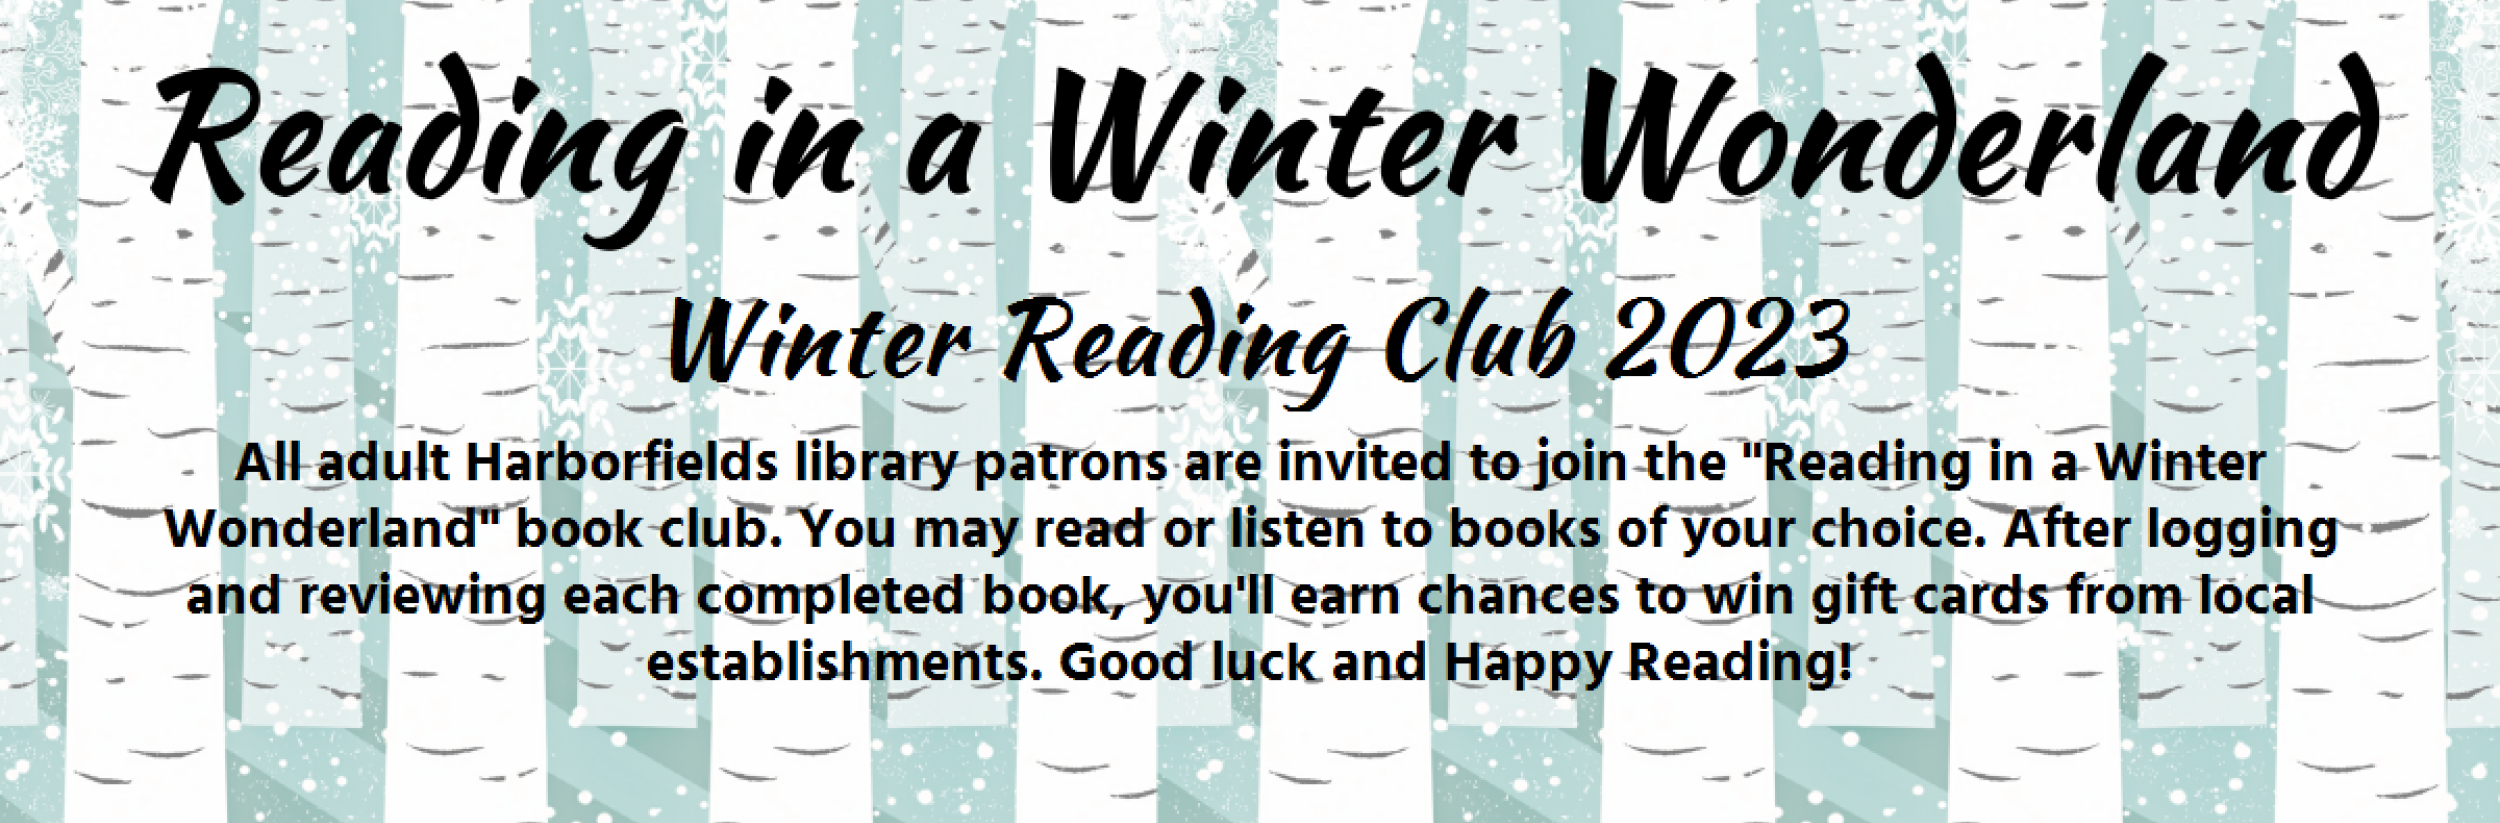 Image for "Winter Reading Club 2023 You may read or listen to books of your choice. After logging and reviewing each completed book, you'll earn chances to win gift cards from local establishments."